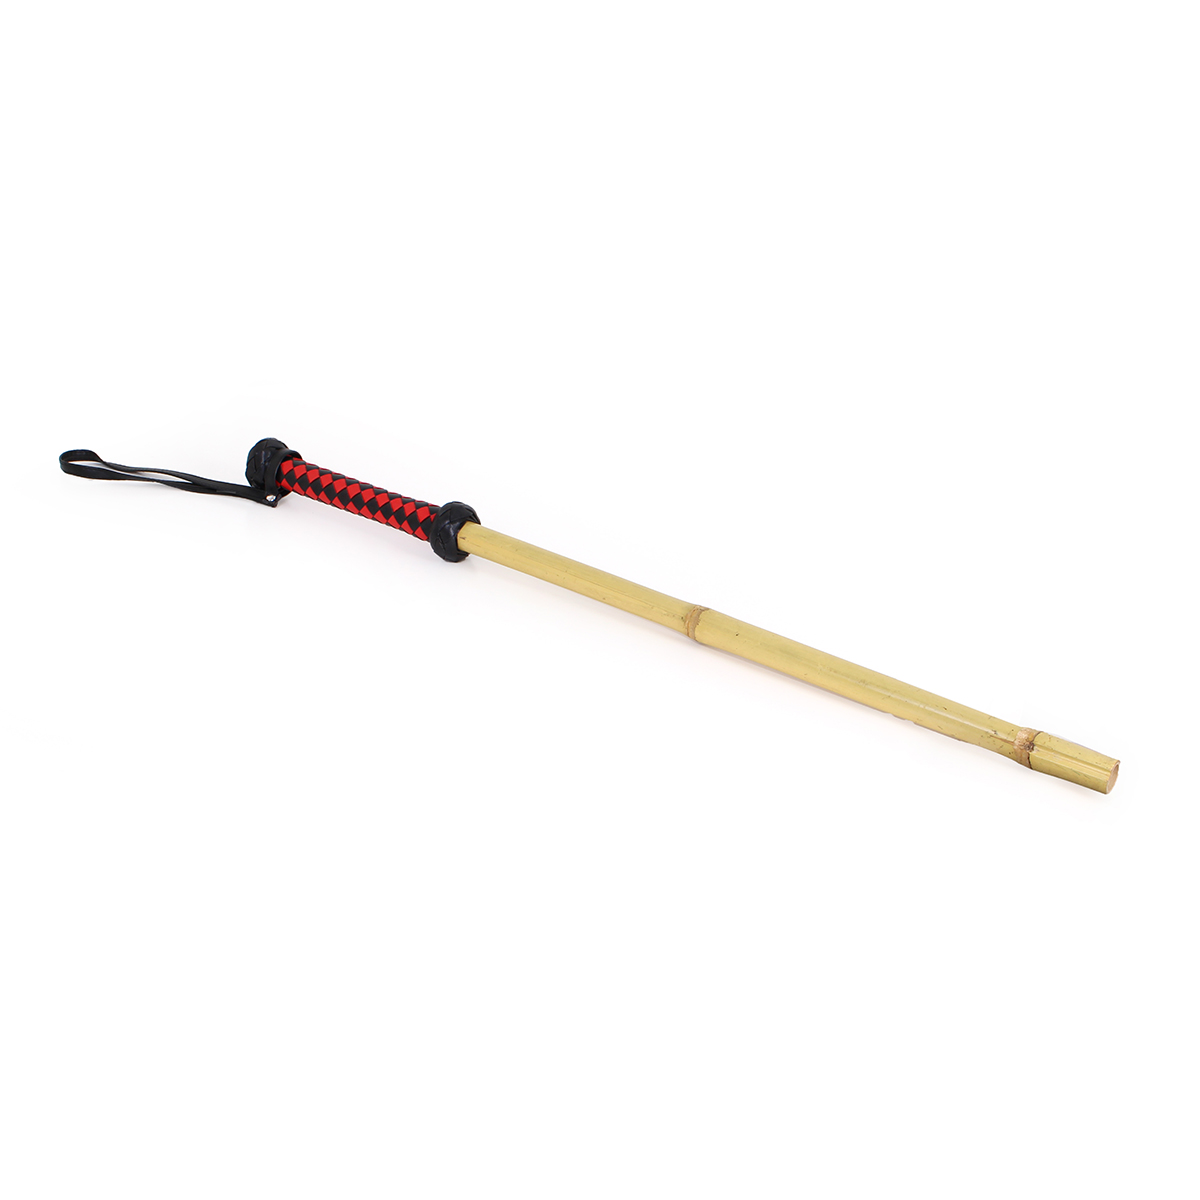 Bamboo-Heavy-Cane-Thick-OPR-321056-1